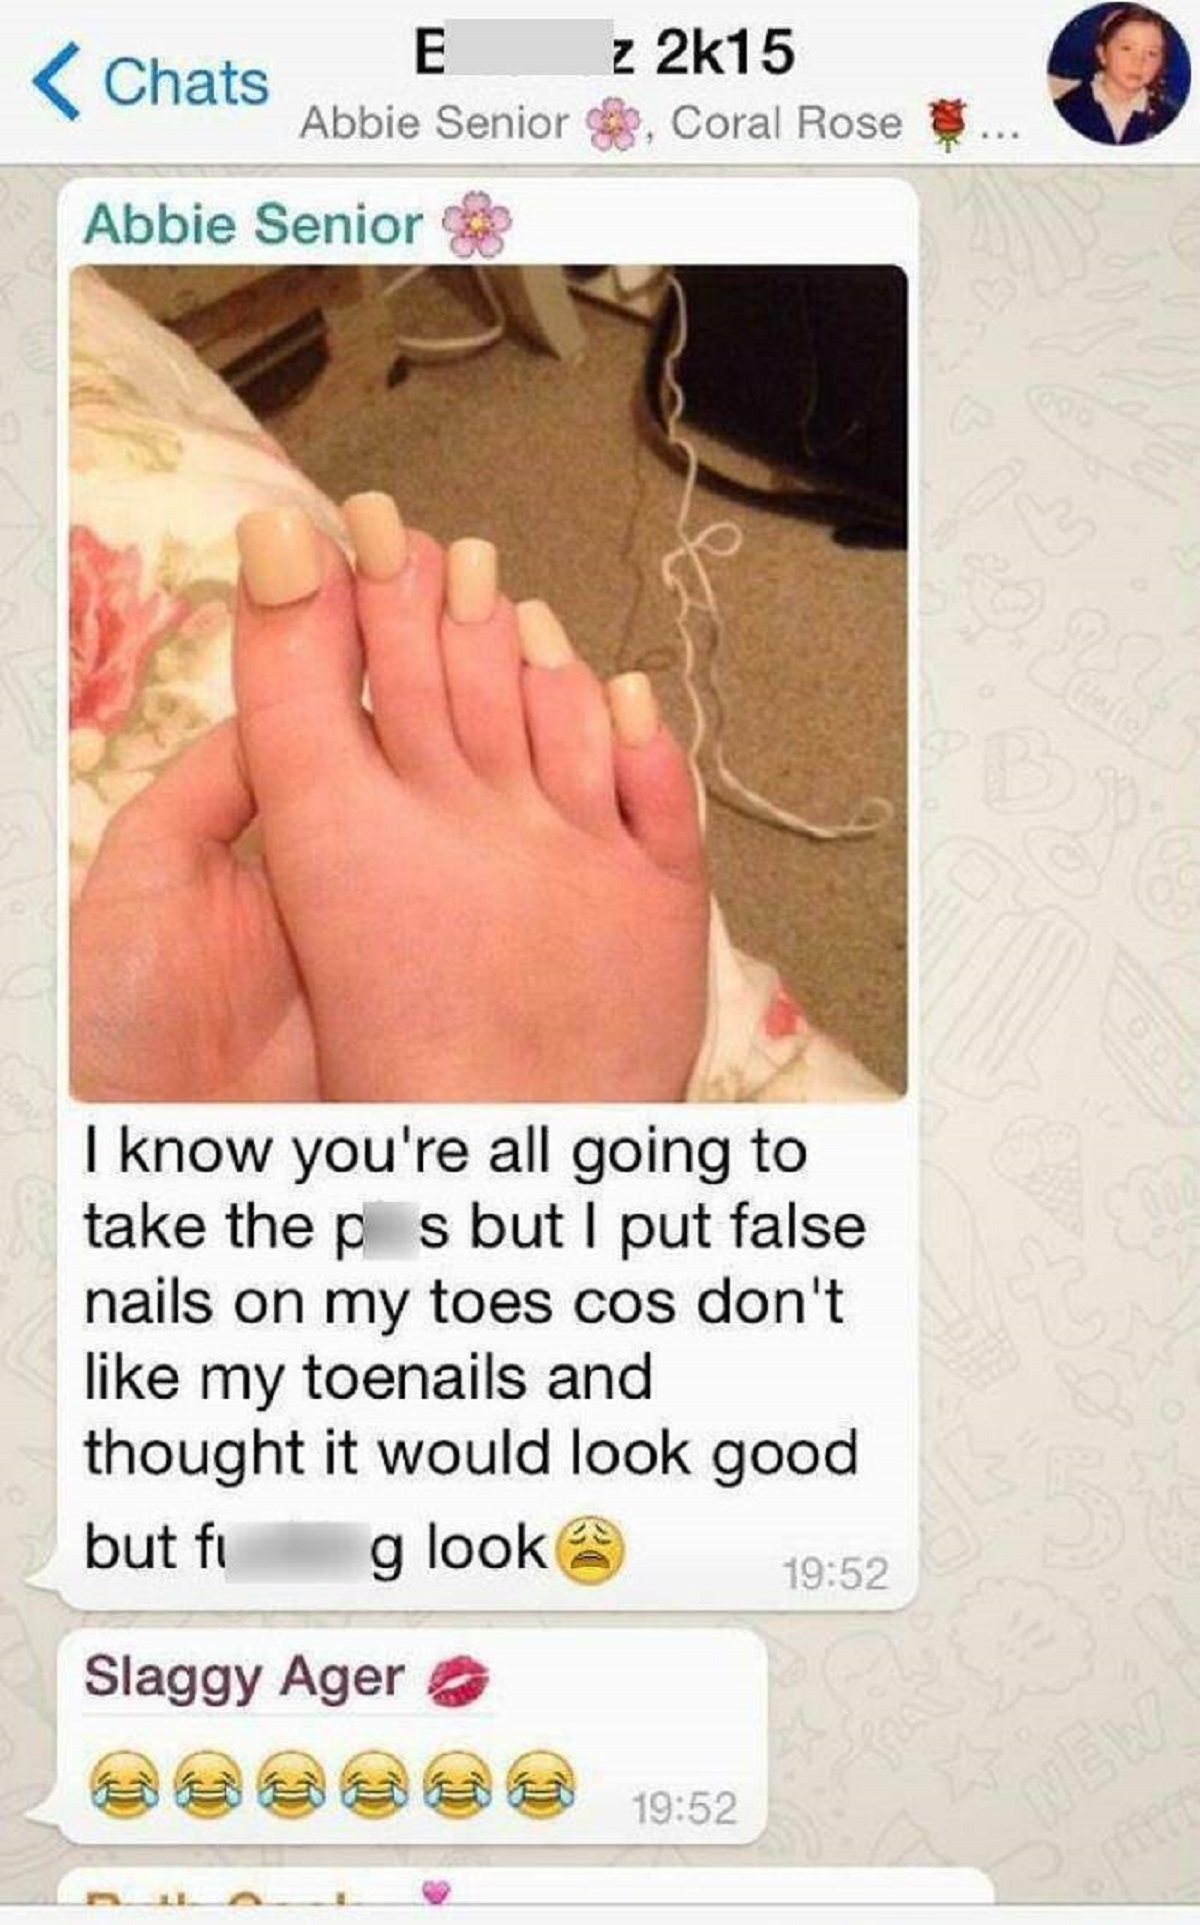 toe - E Chats Abbie Senior Abbie Senior z 2k15 Coral Rose I know you're all going to take the ps but I put false nails on my toes cos don't my toenails and thought it would look good but fi g look Slaggy Ager